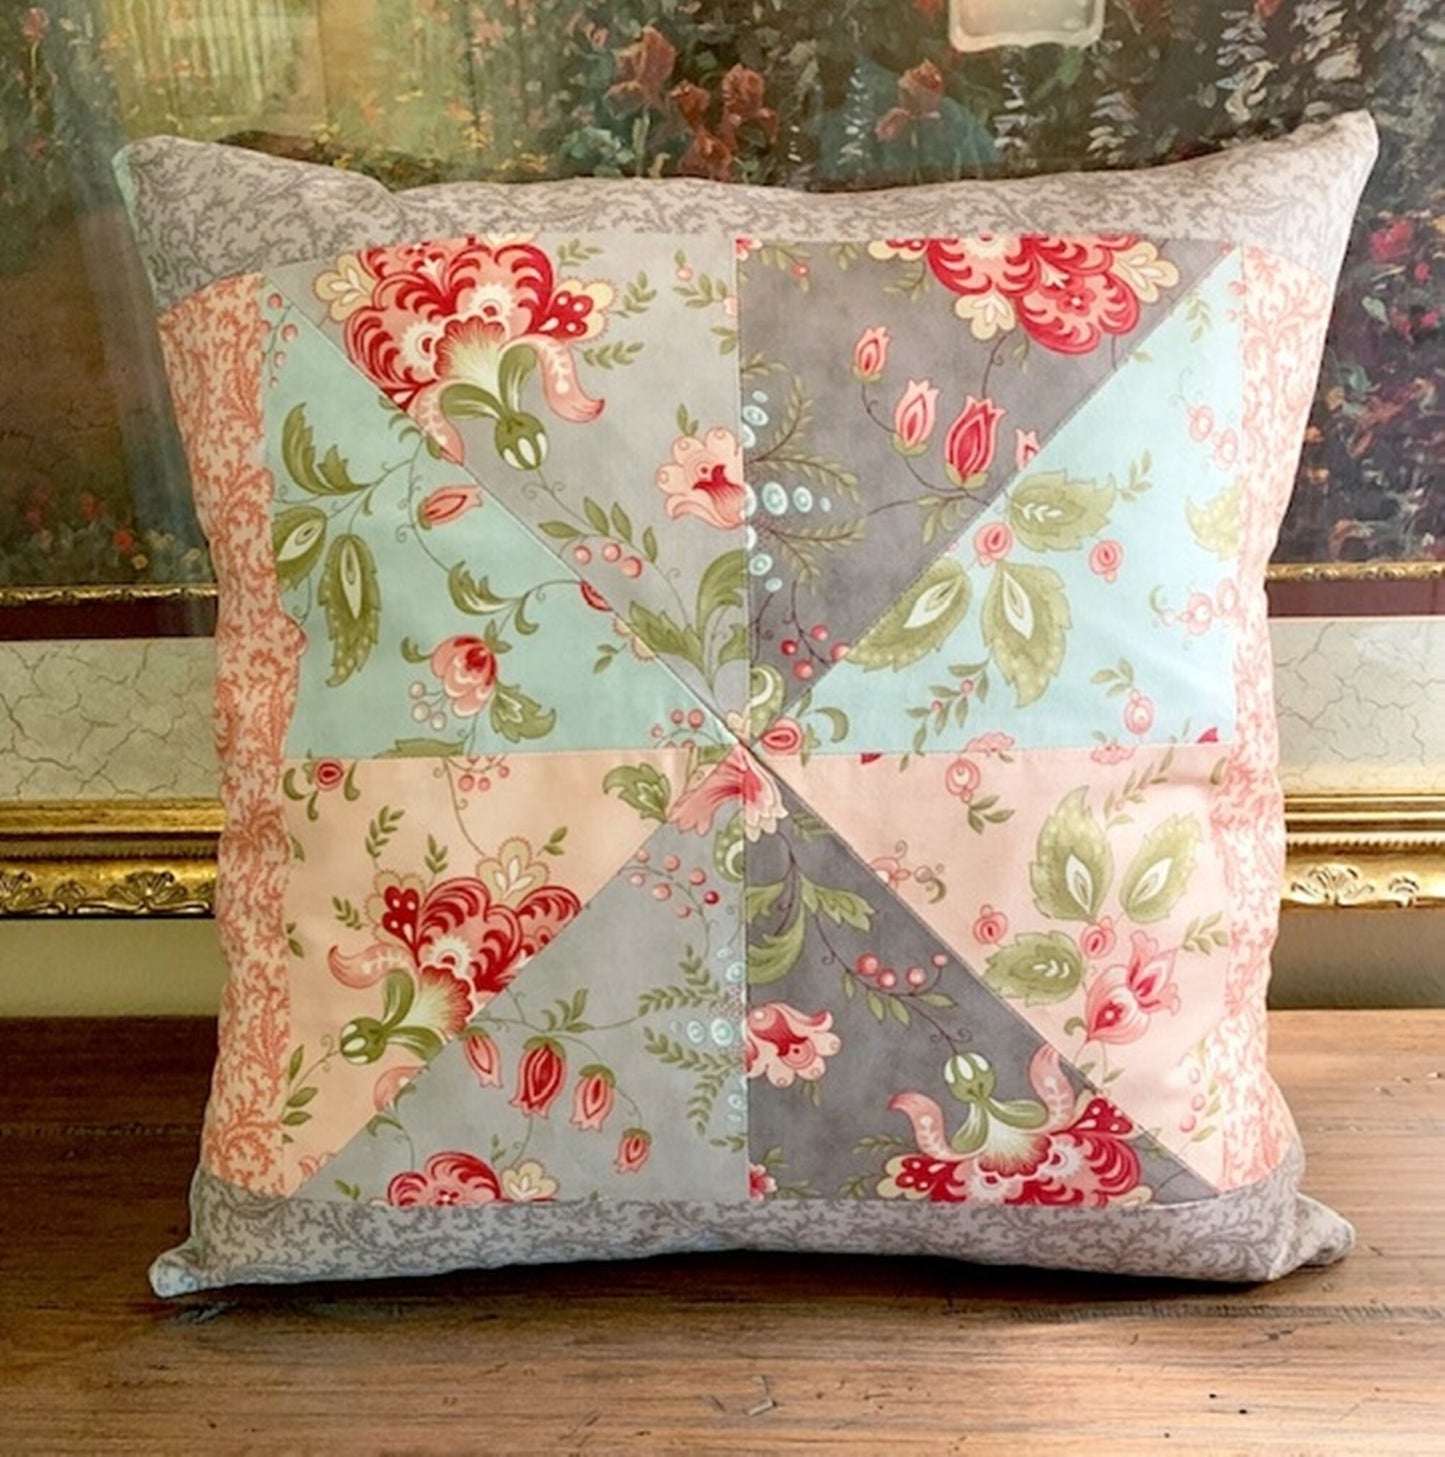 Throw Pillow | 3 Sisters Porcelain Patchwork Fabric  | Chic Shabby Home Decor